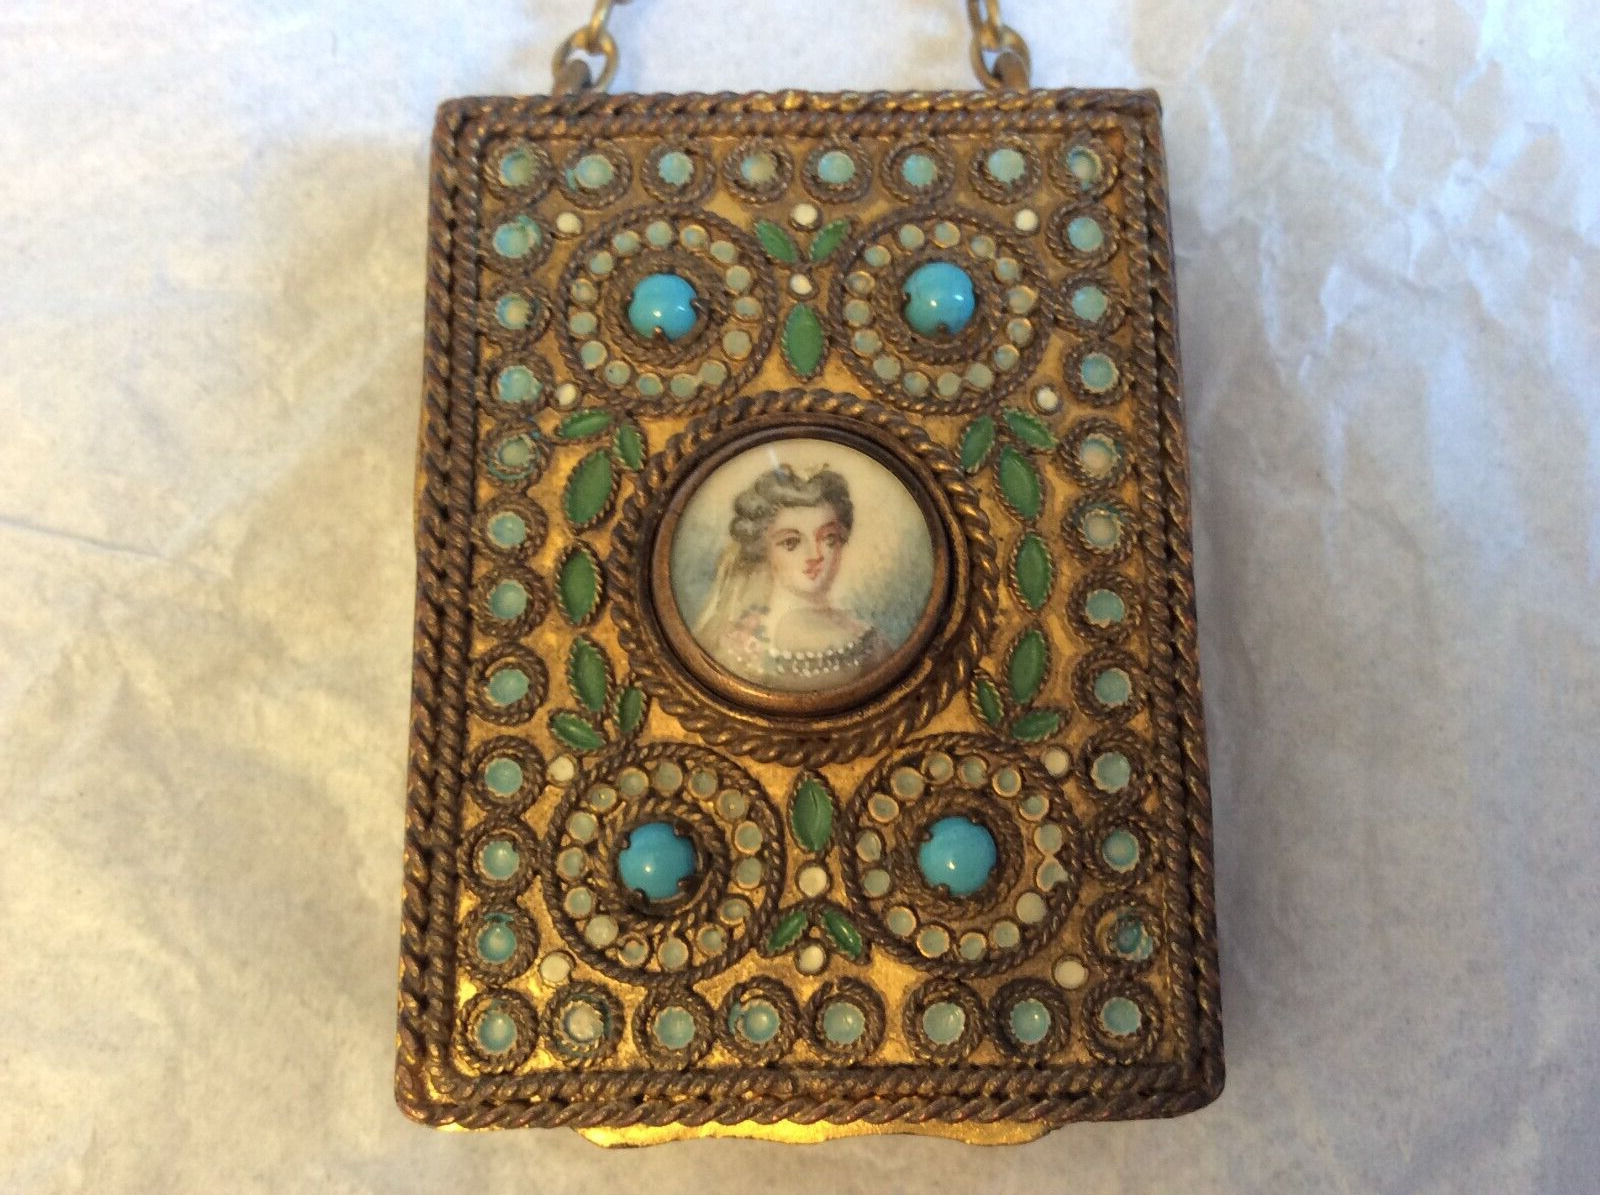 ANTIQUE FRENCH JEWELED ENAMEL FINGER RING H-P PORTRAIT UNDER GLASS COMPACT